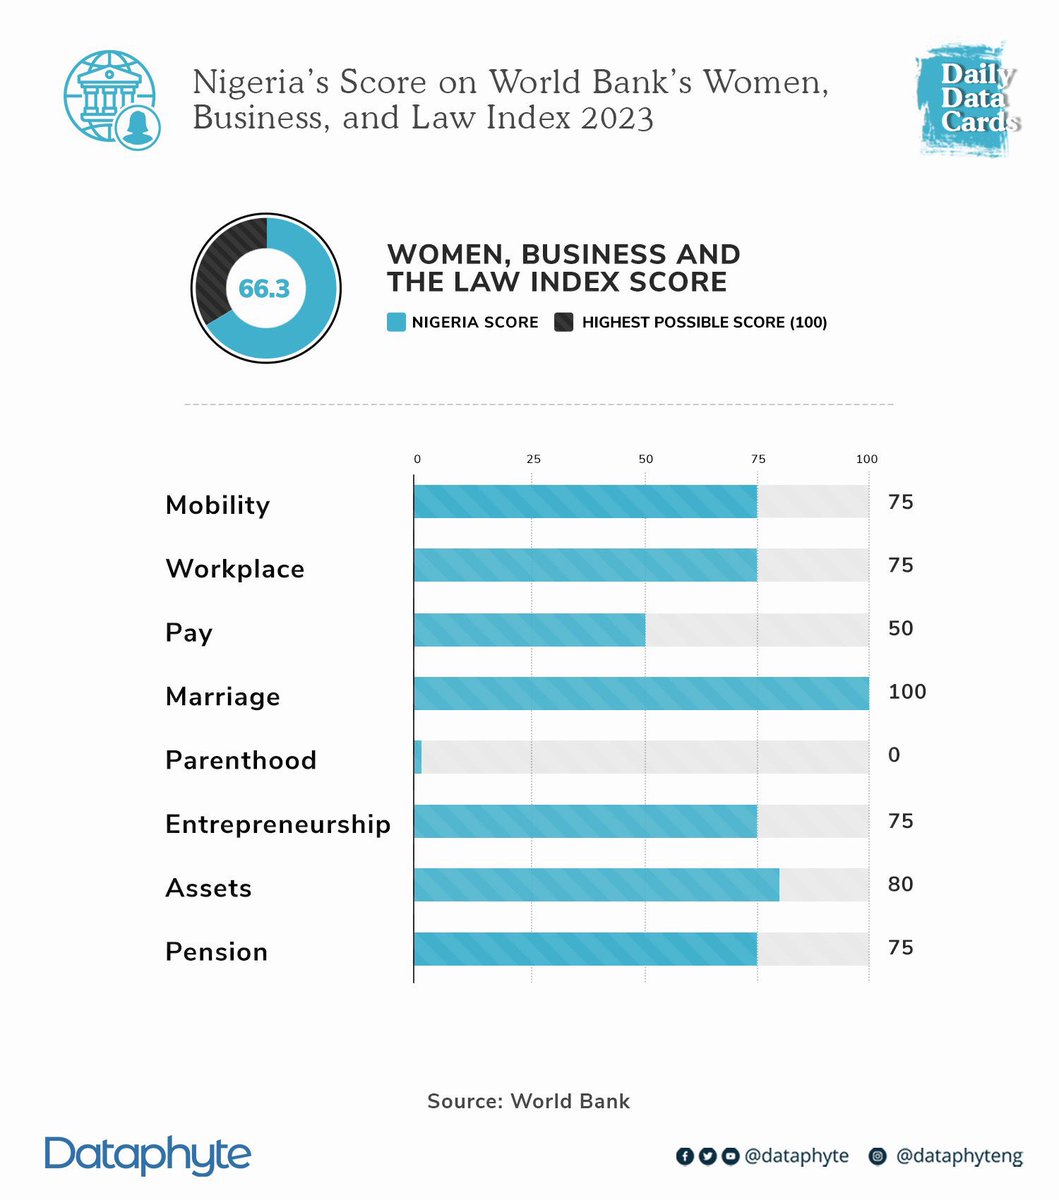 Ever heard of the Women, Business and the Law Index by the World Bank? It scores countries on laws impacting women’s work, pay and maternity provisions. Nigeria's score is 66.3 out of 100, showing progress but still below the regional average for Africa (72.6) #InspireInclusion…